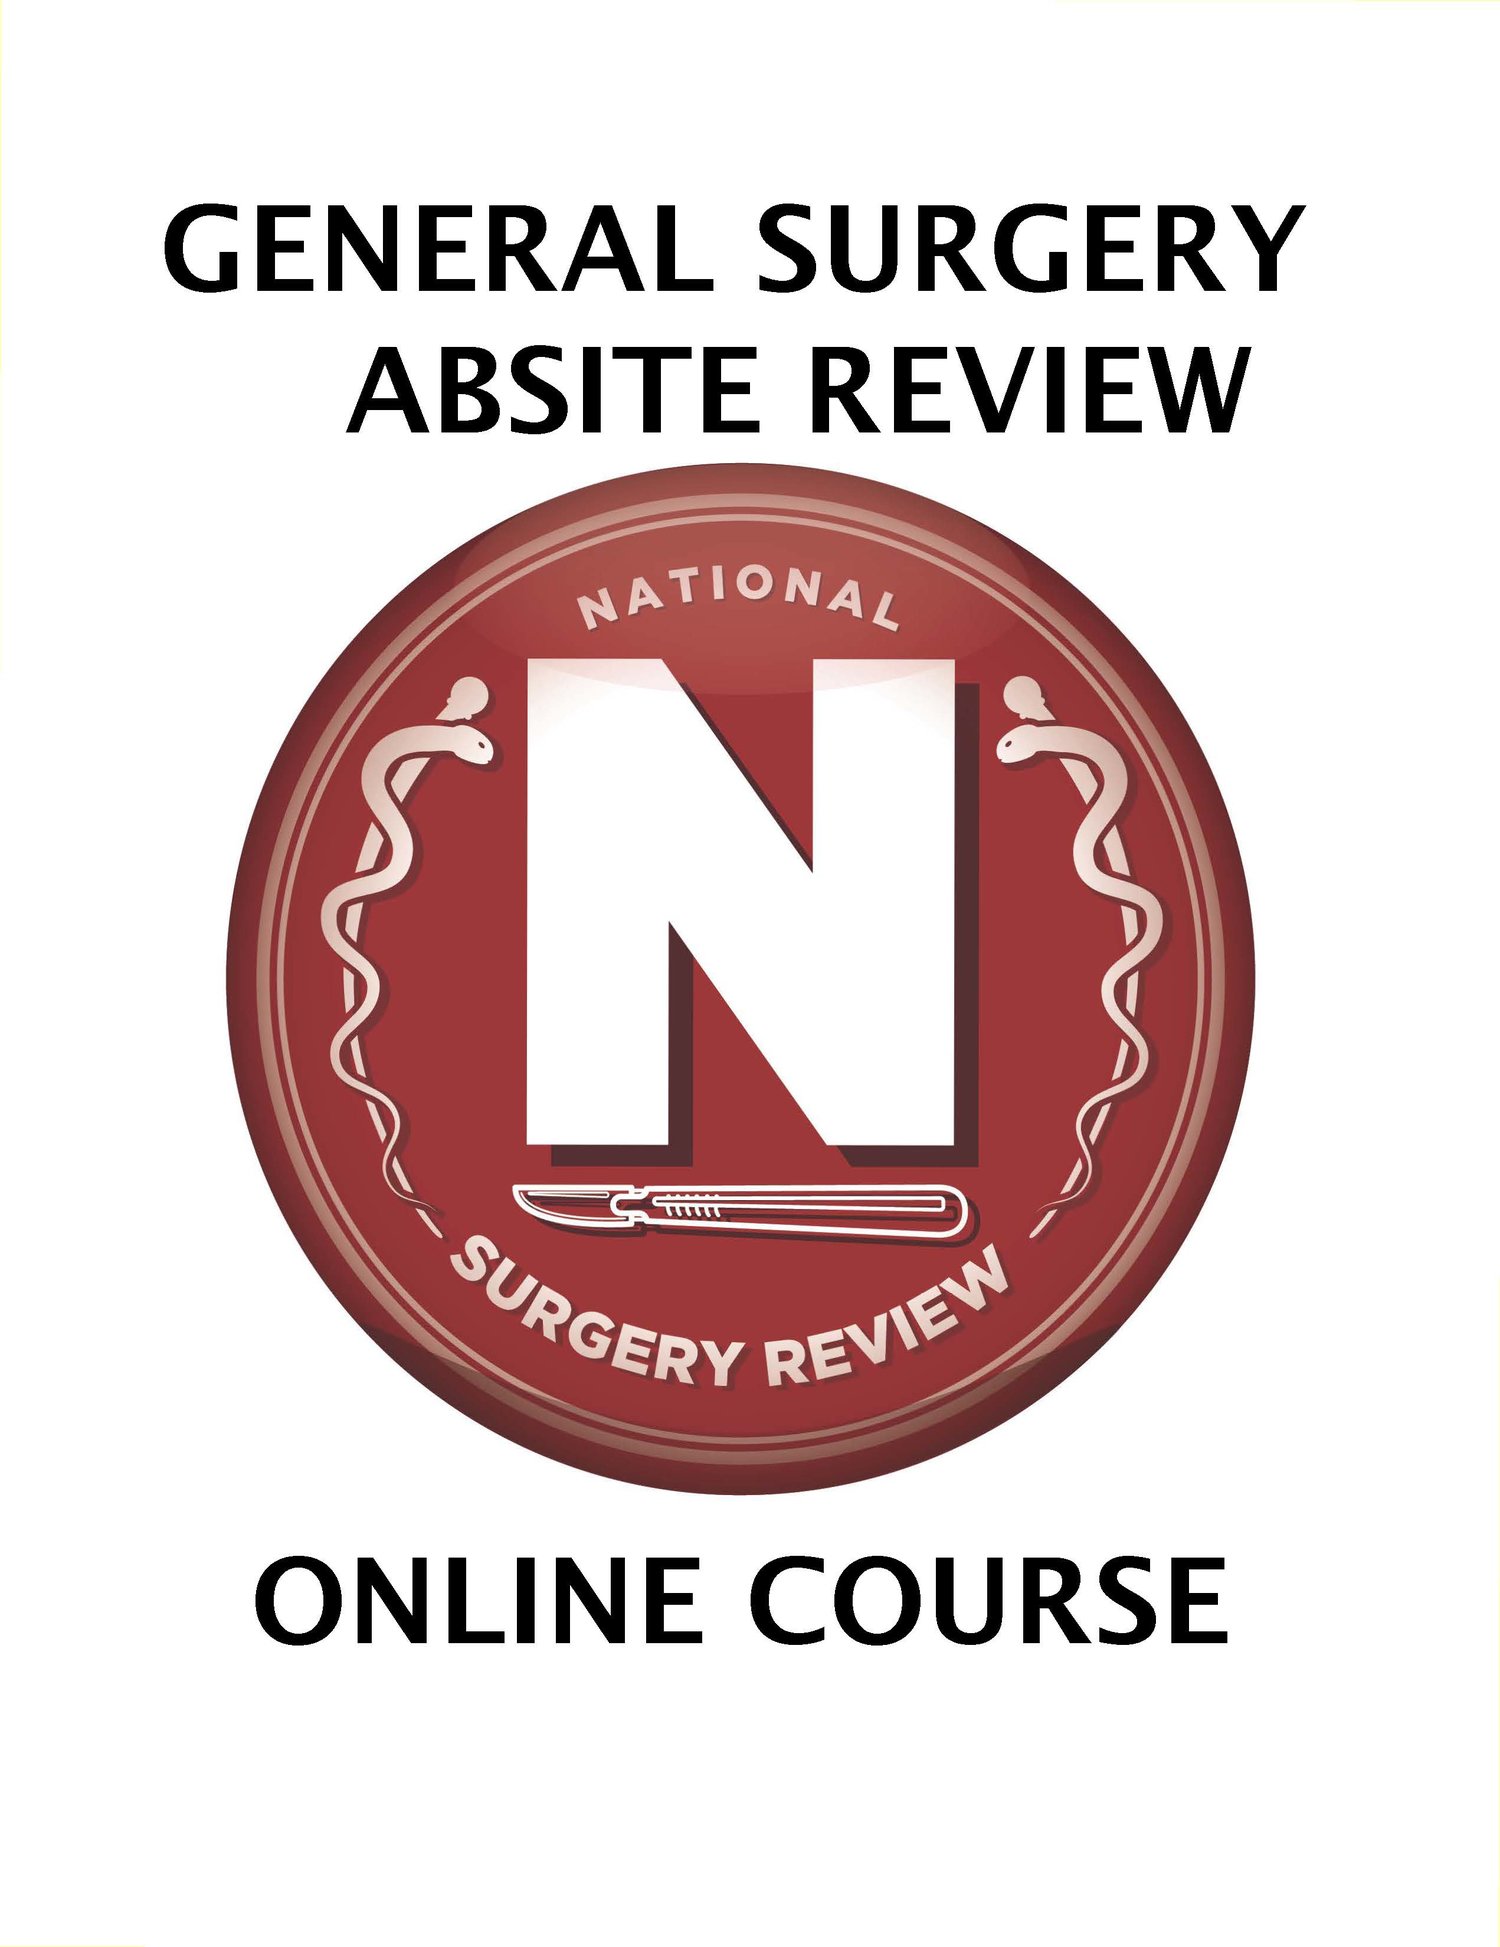 ABSITE/In Training Review Course Online — National Surgery Review